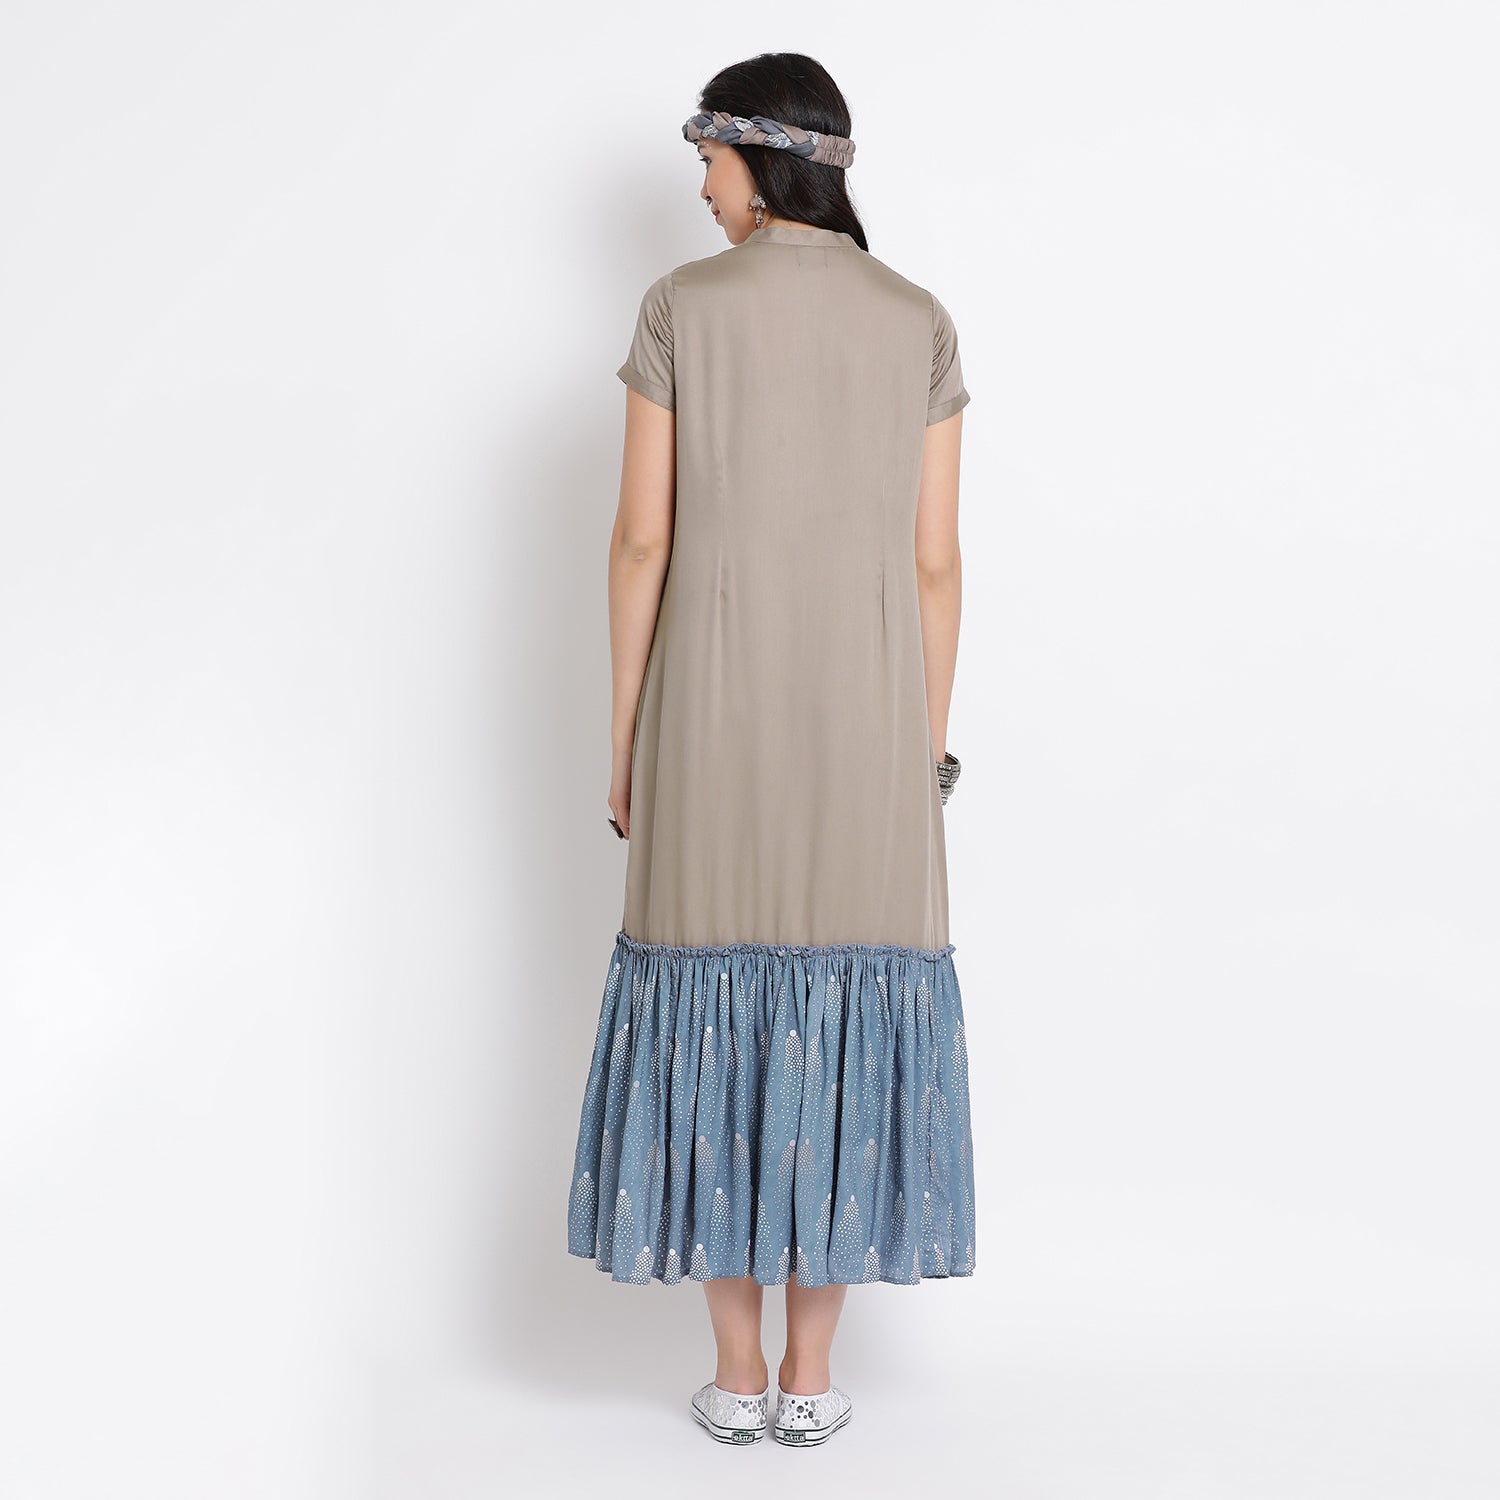 Grey long dress with printed frill and thread embroidery